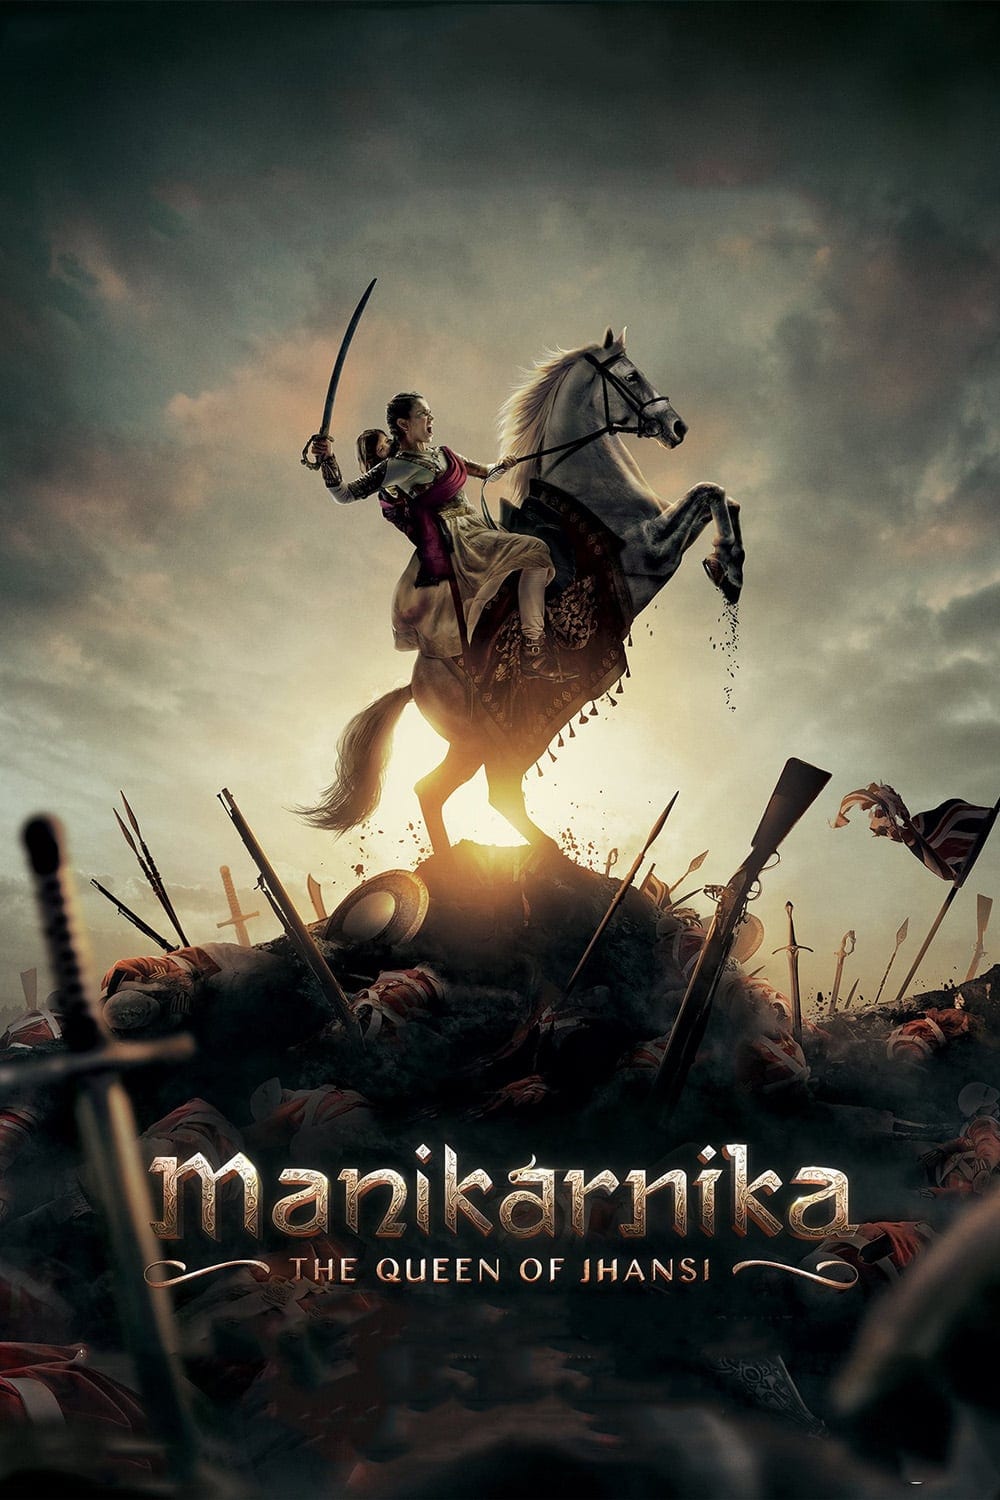 Poster for the movie "Manikarnika: The Queen of Jhansi"